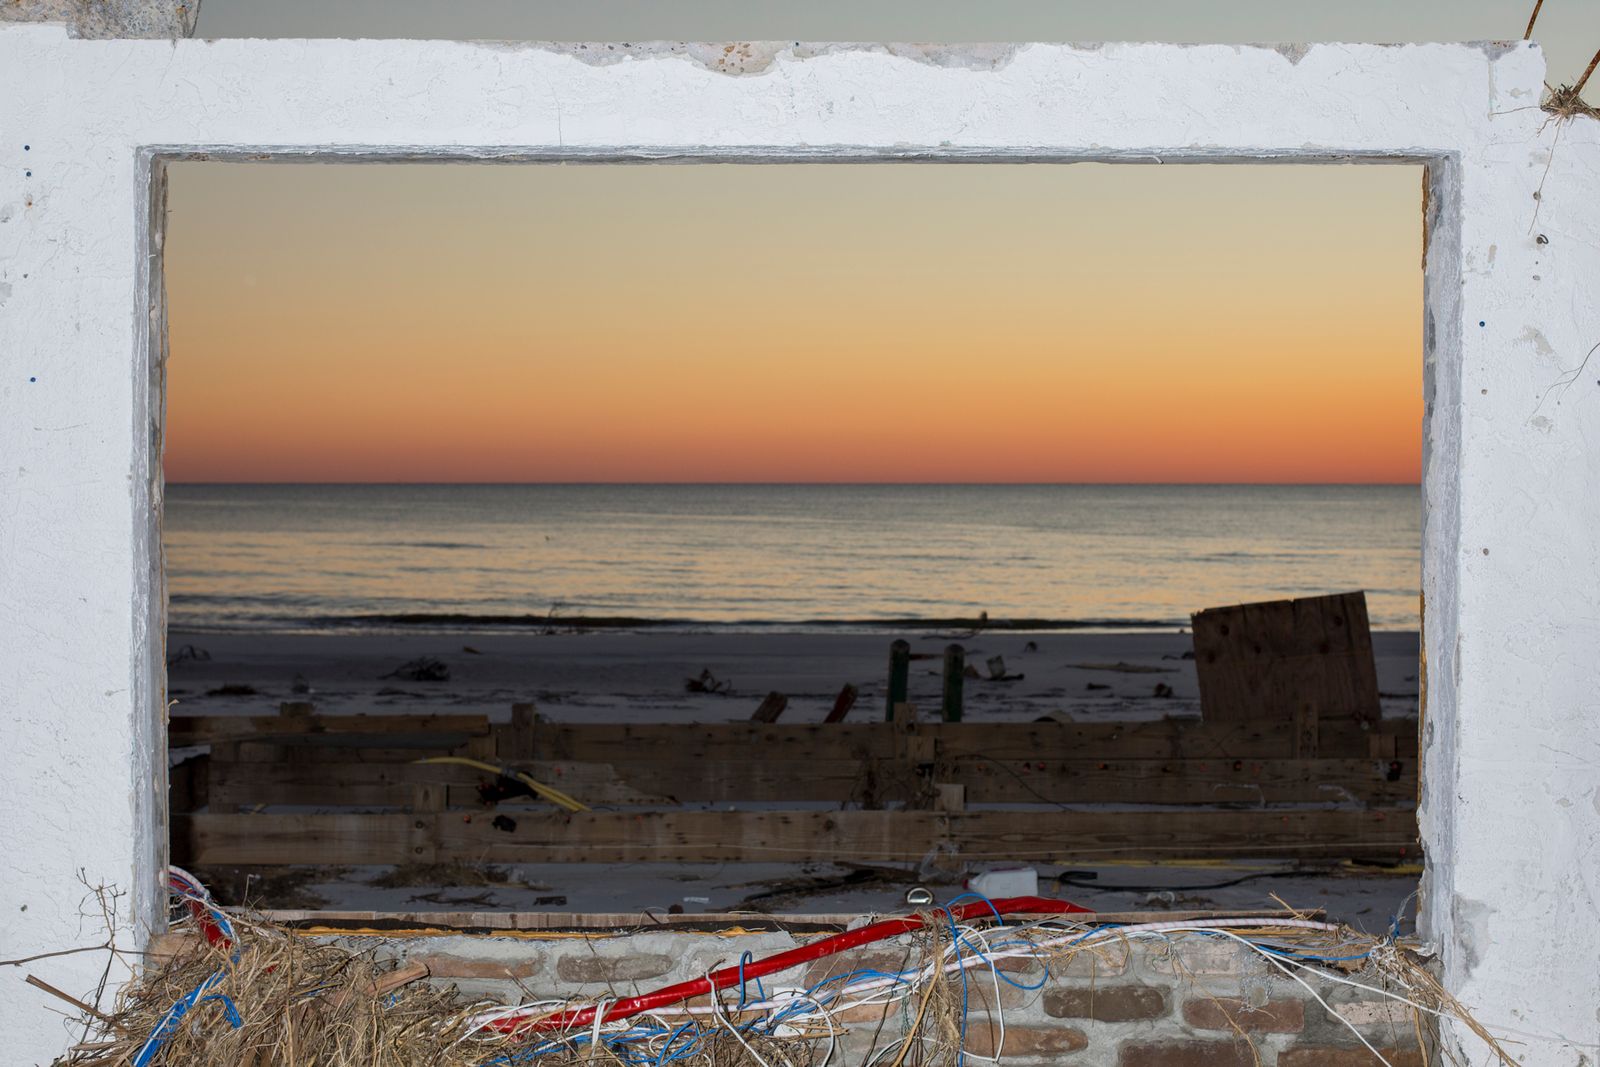 © Bryan Anselm - The Gulf of Mexico seen from the structure of a destroyed home in Mexico Beach, Florida on November 16, 2018.